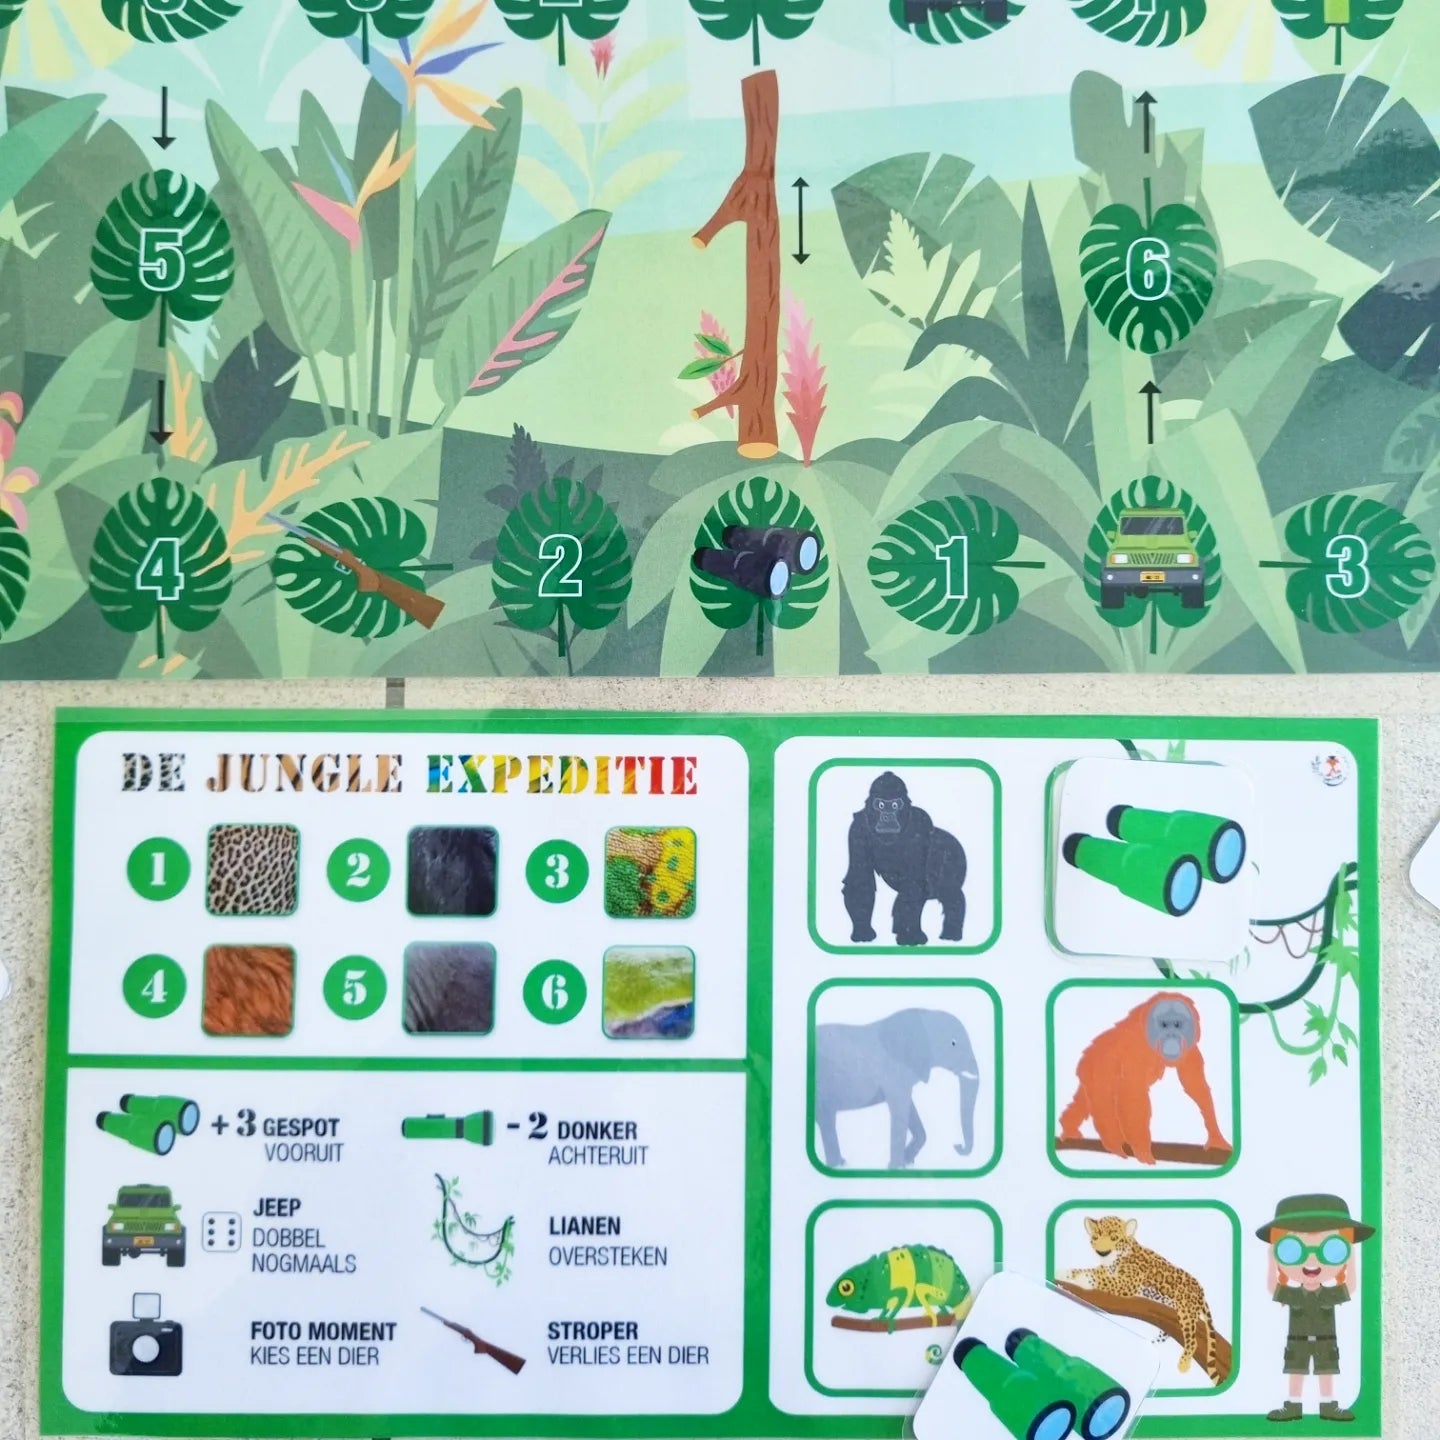 The Jungle Expedition